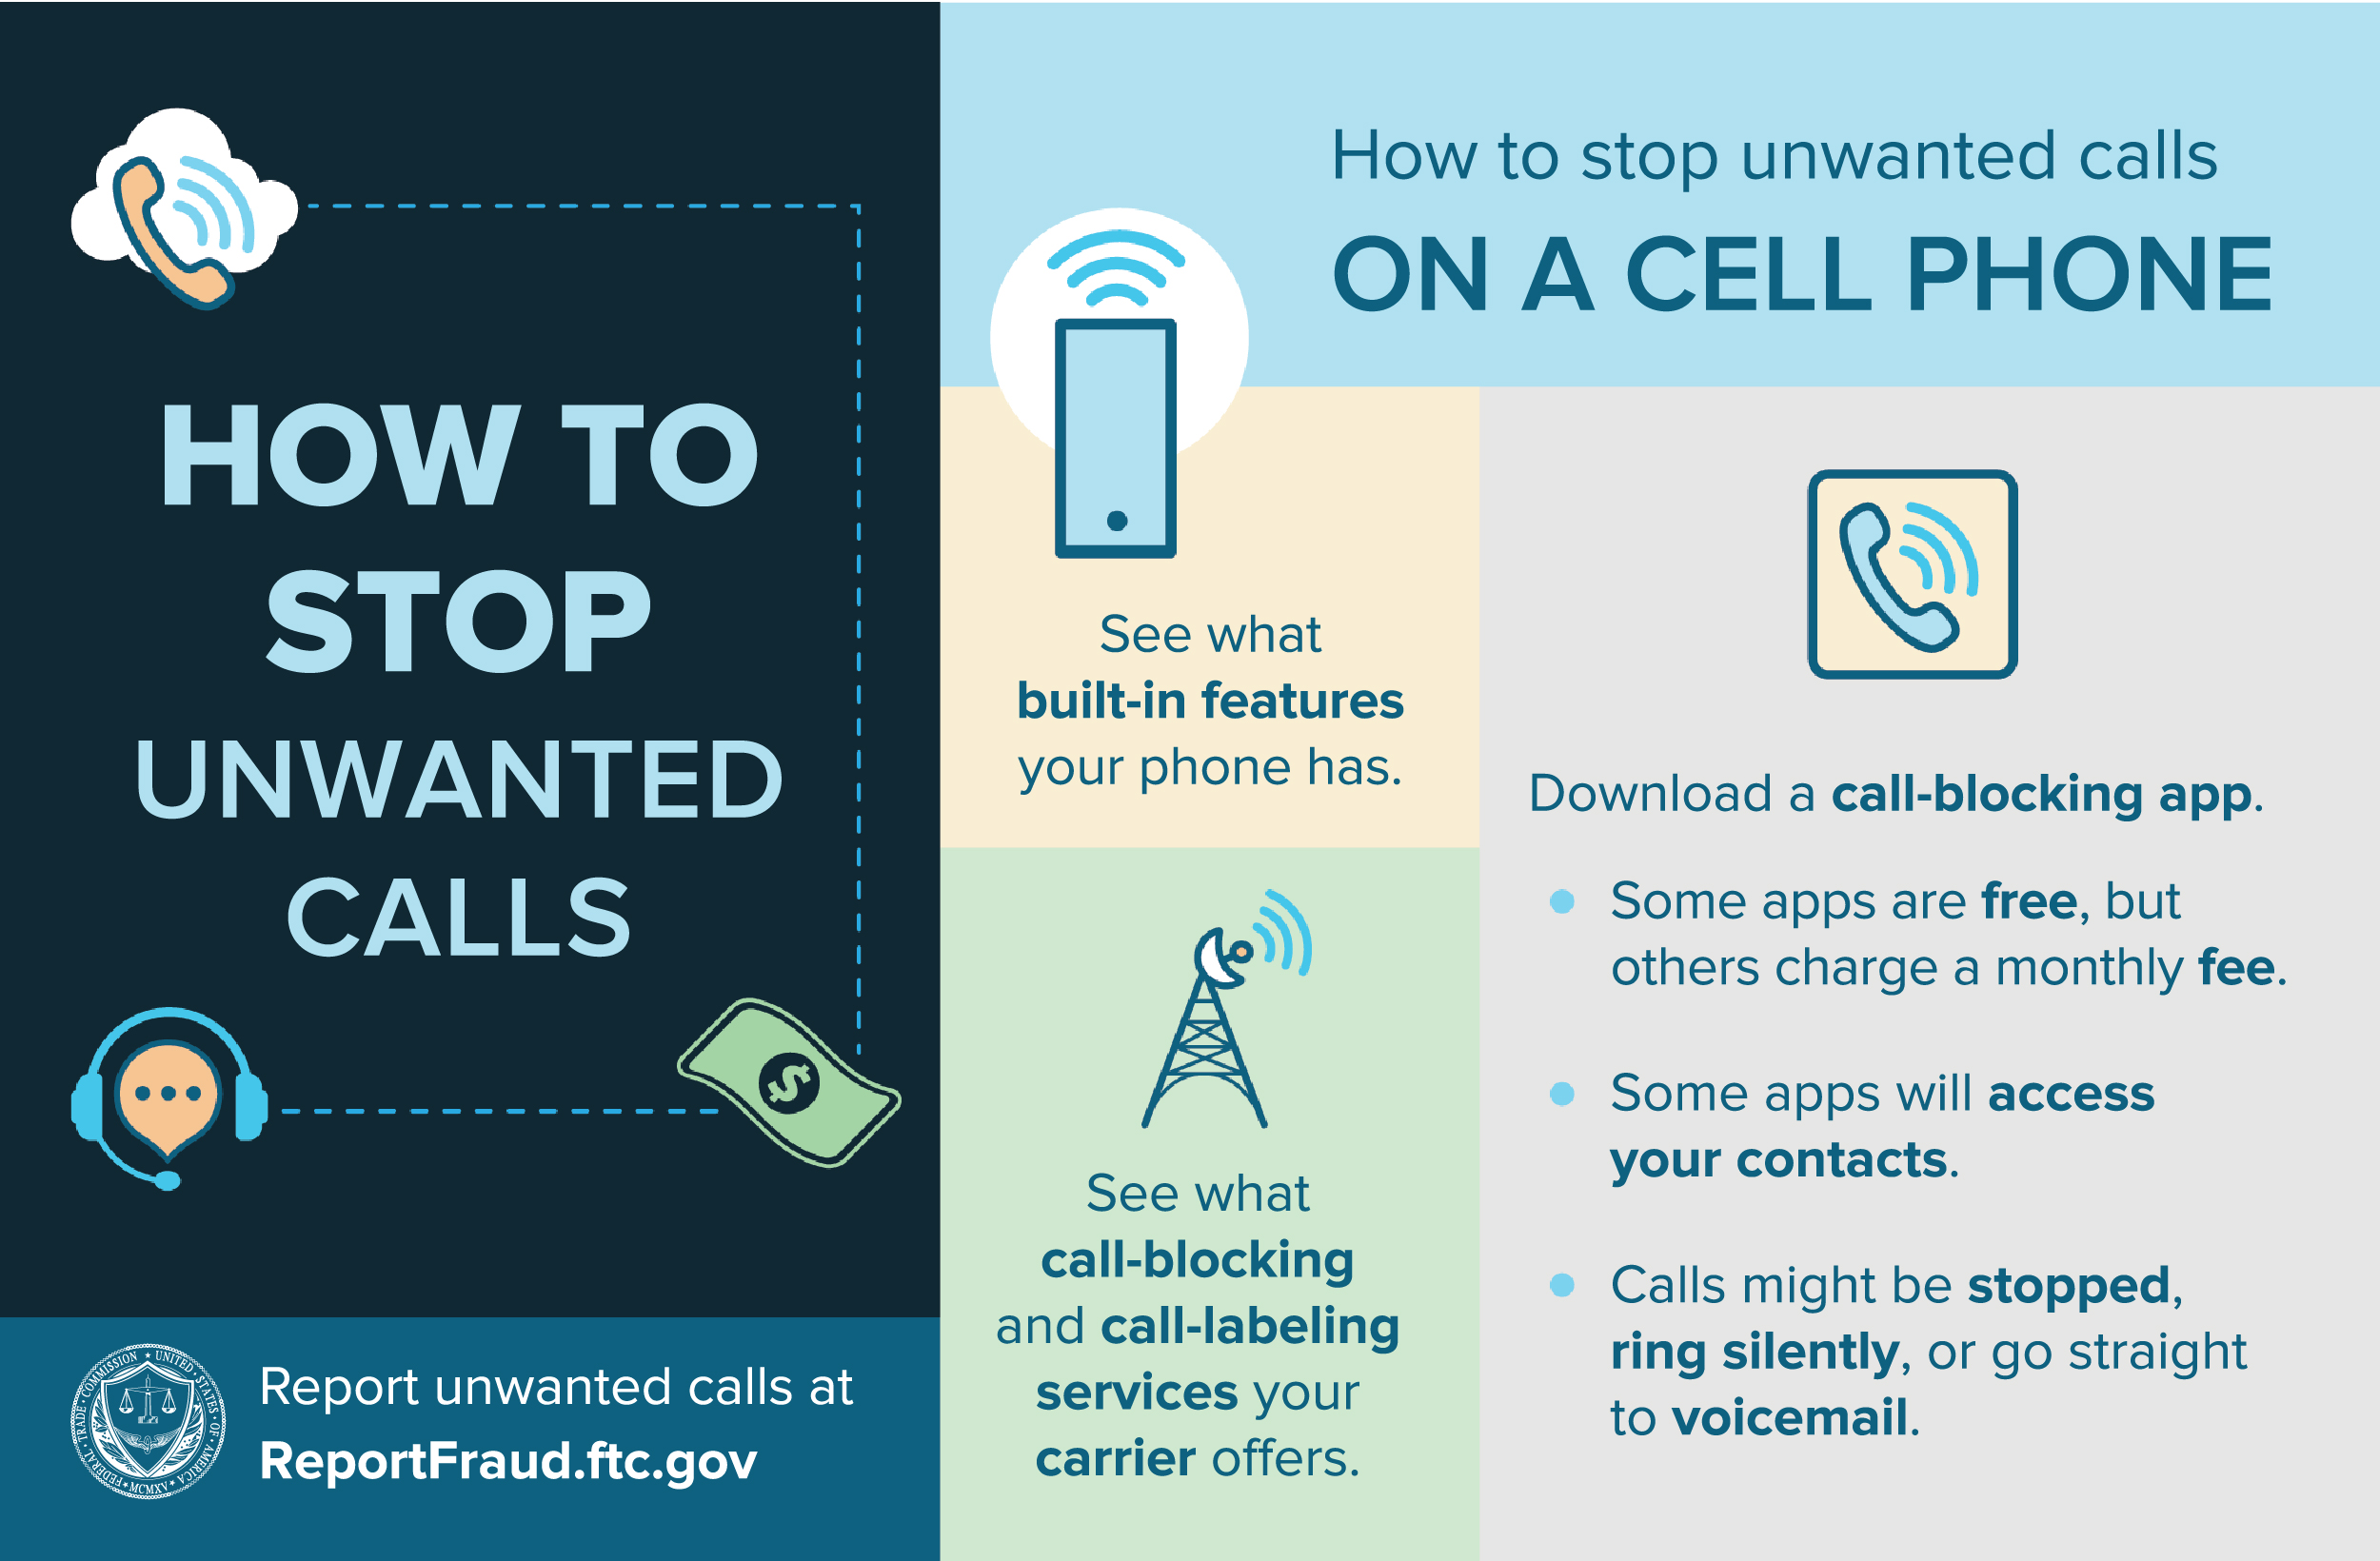 How to stop unwanted calls on a Cell Phone - report unwanted calls at ReportFraud.ftc.gov. See what built-in features your phone has. See what call-blocking and call-labeling services your carrier offers. Download a call-blocking app. Some apps are free, but others charge a monthly fee. Some apps will access your contacts. Calls might be stopped, ring silently, or go straight to voicemail.